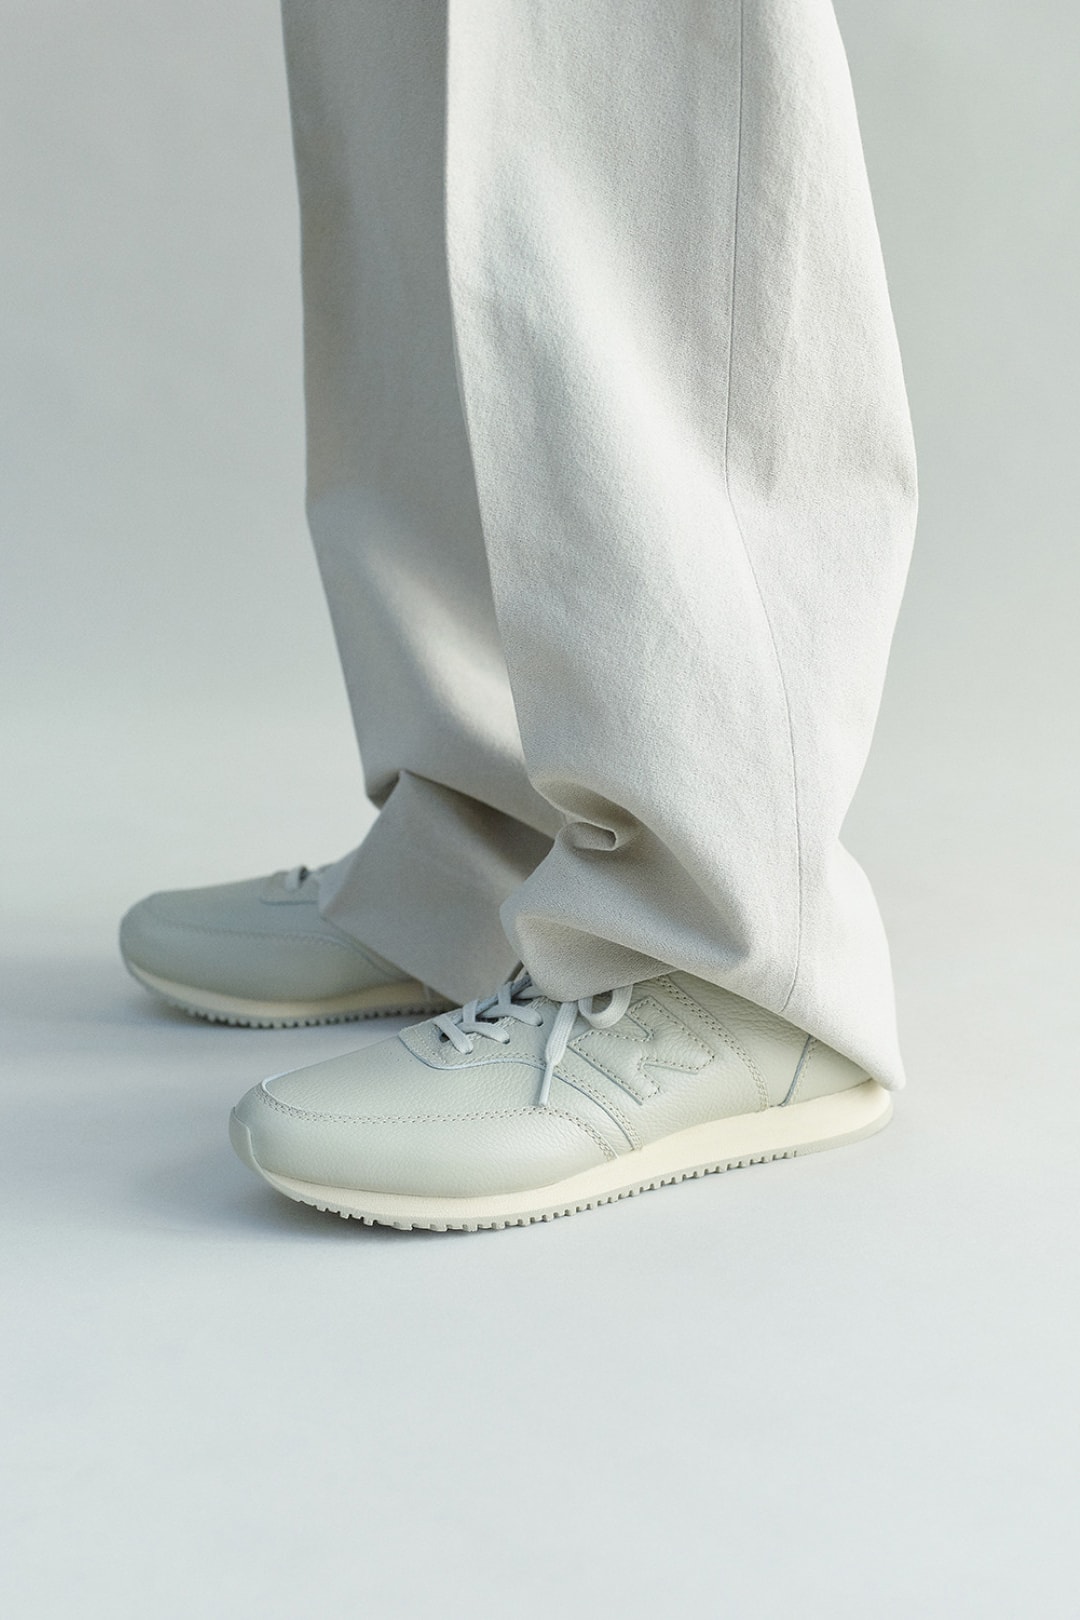 AURALEE x New Balance SS20 COMP100, Apparel collaboration collection spring summer 2020 japan sneaker wholegarment cotton knit pants sweater 